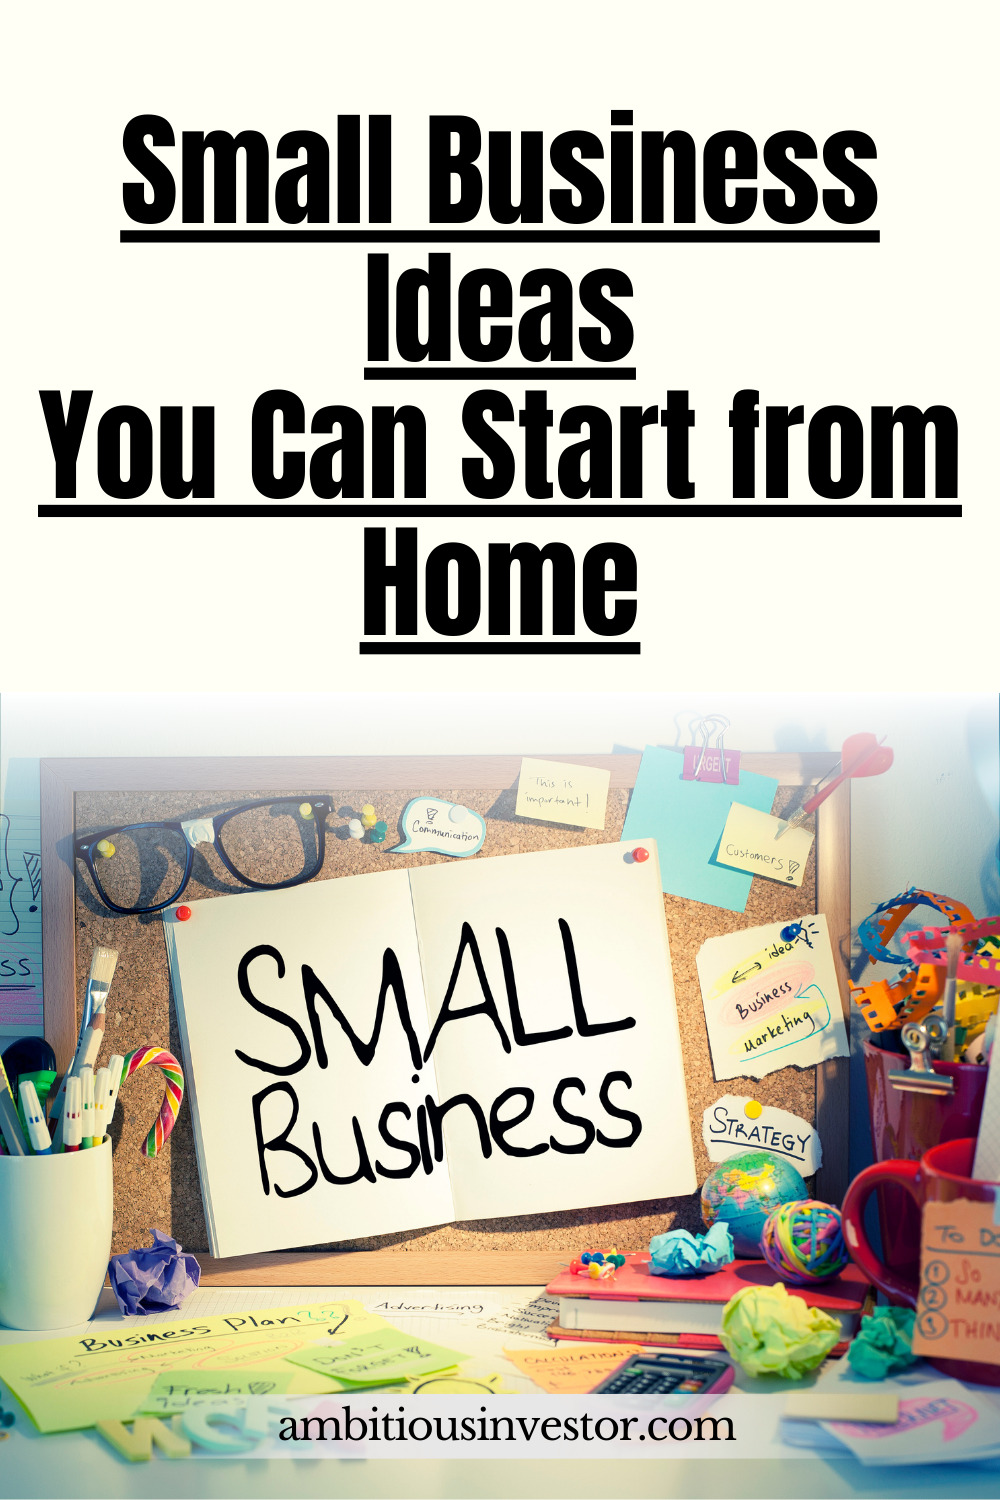 Small Business Ideas You Can Start from Home